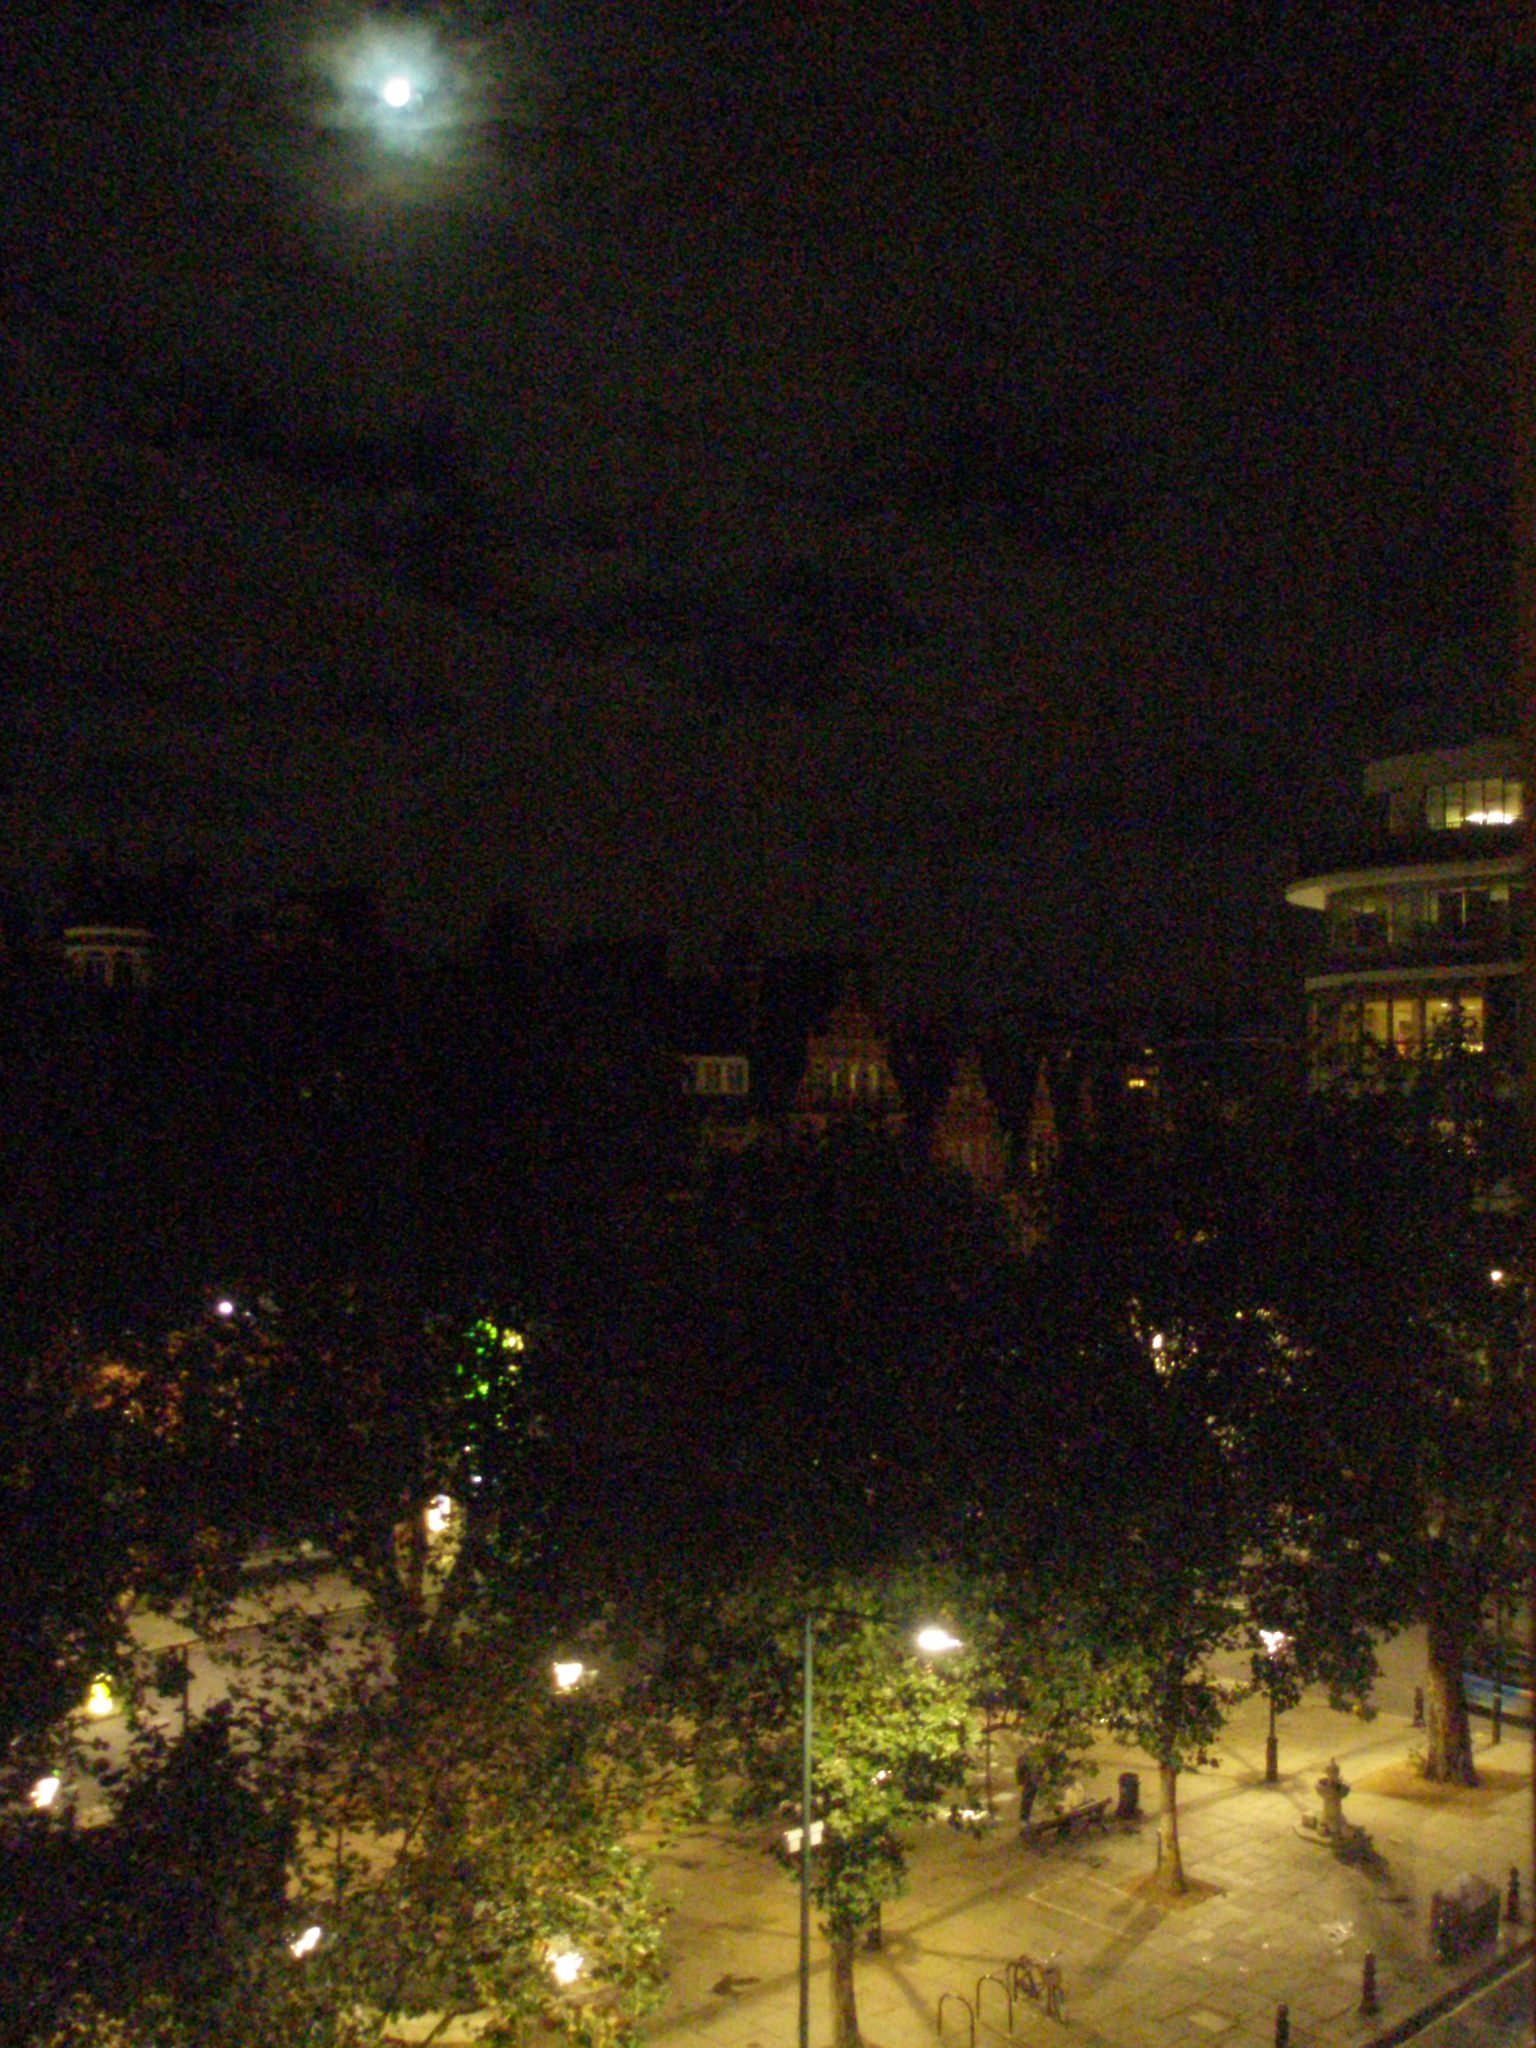 An insomniac's view from my room at the Sloane Square Hotel, after all the sensible people in London had gone to sleep.